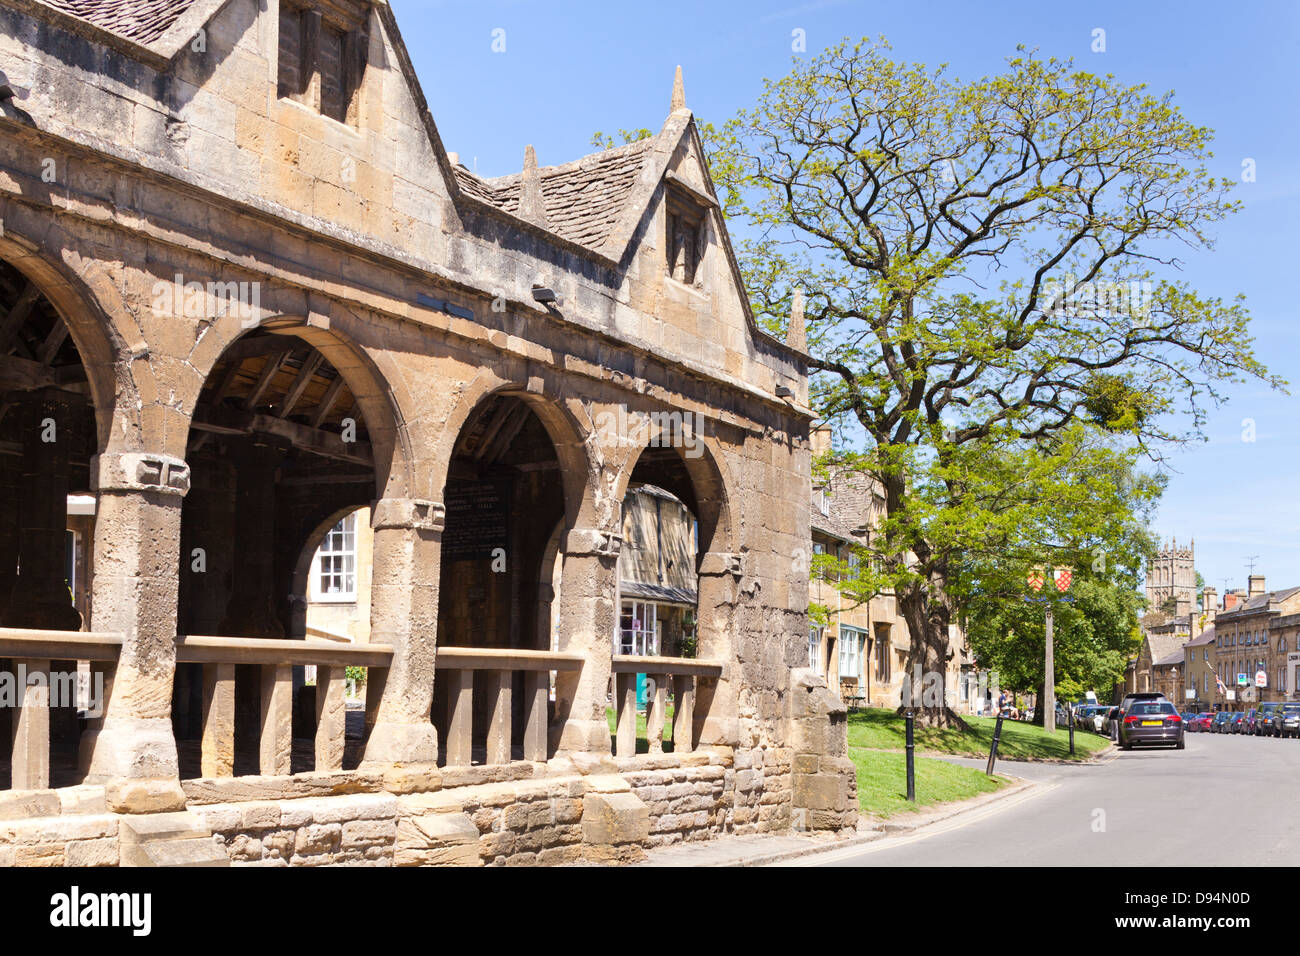 The Market Hall in the Cotswold village of Chipping Campden, Gloucestershire UK Stock Photo